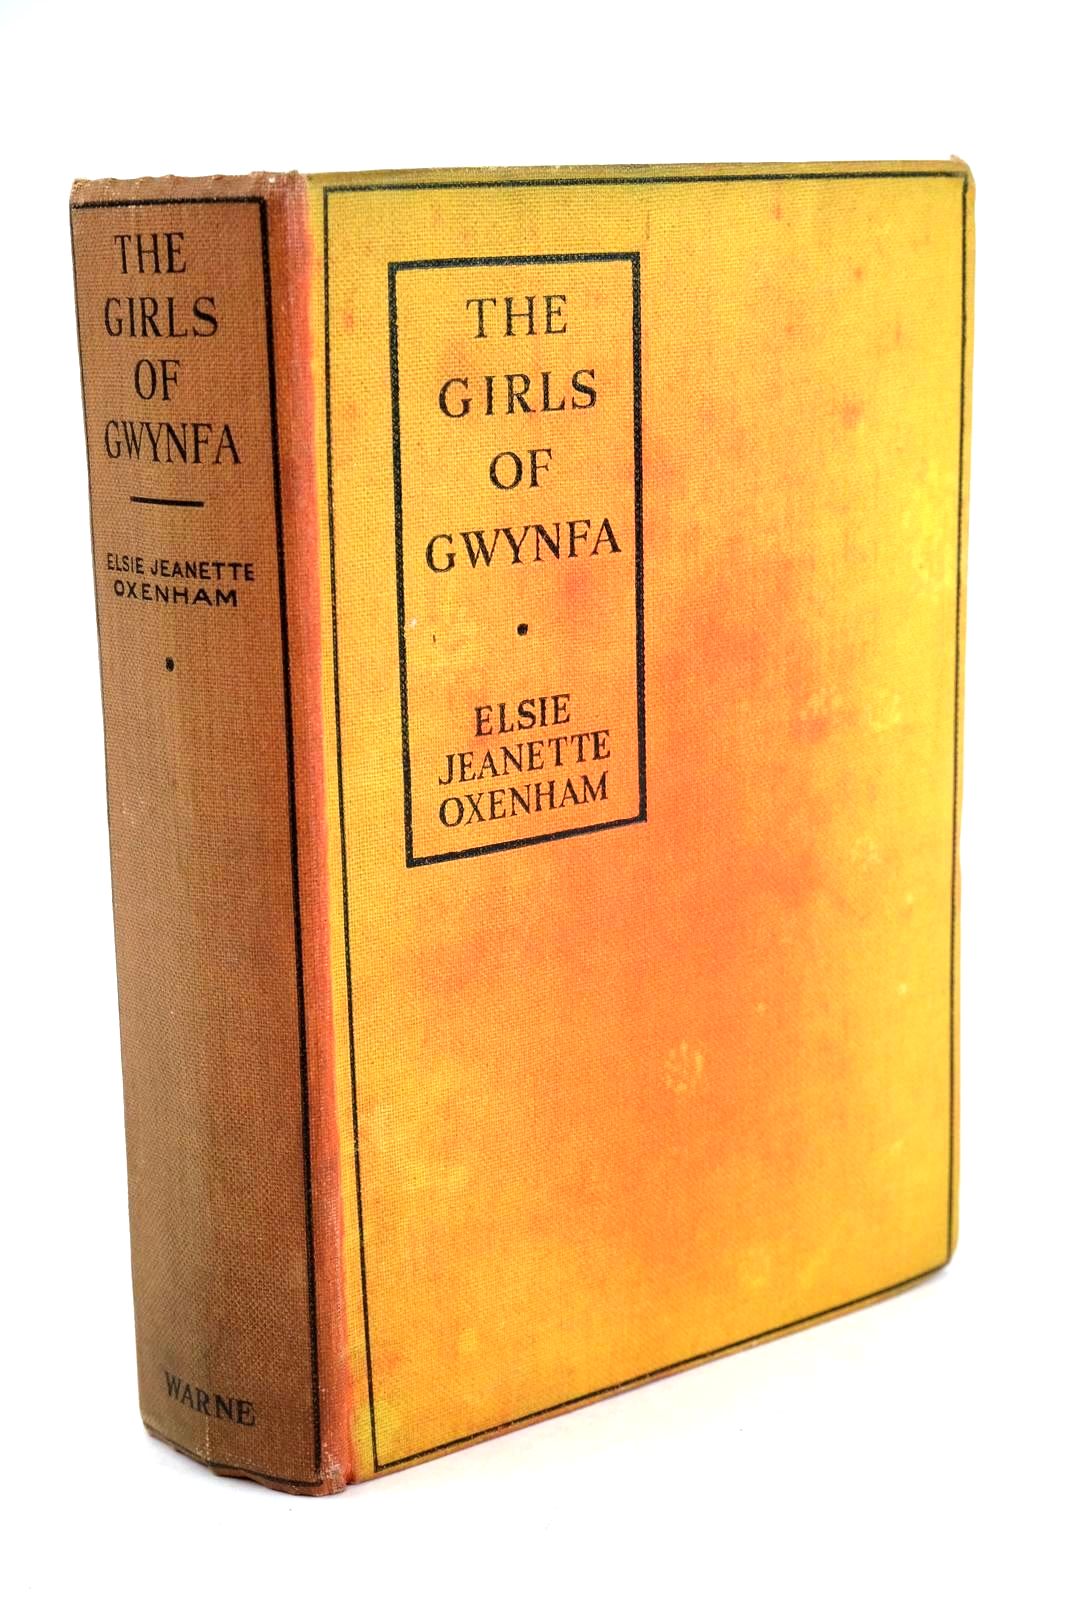 Photo of THE GIRLS OF GWYNFA written by Oxenham, Elsie J. illustrated by Brisley, Nina K. published by Frederick Warne & Co Ltd. (STOCK CODE: 1324244)  for sale by Stella & Rose's Books